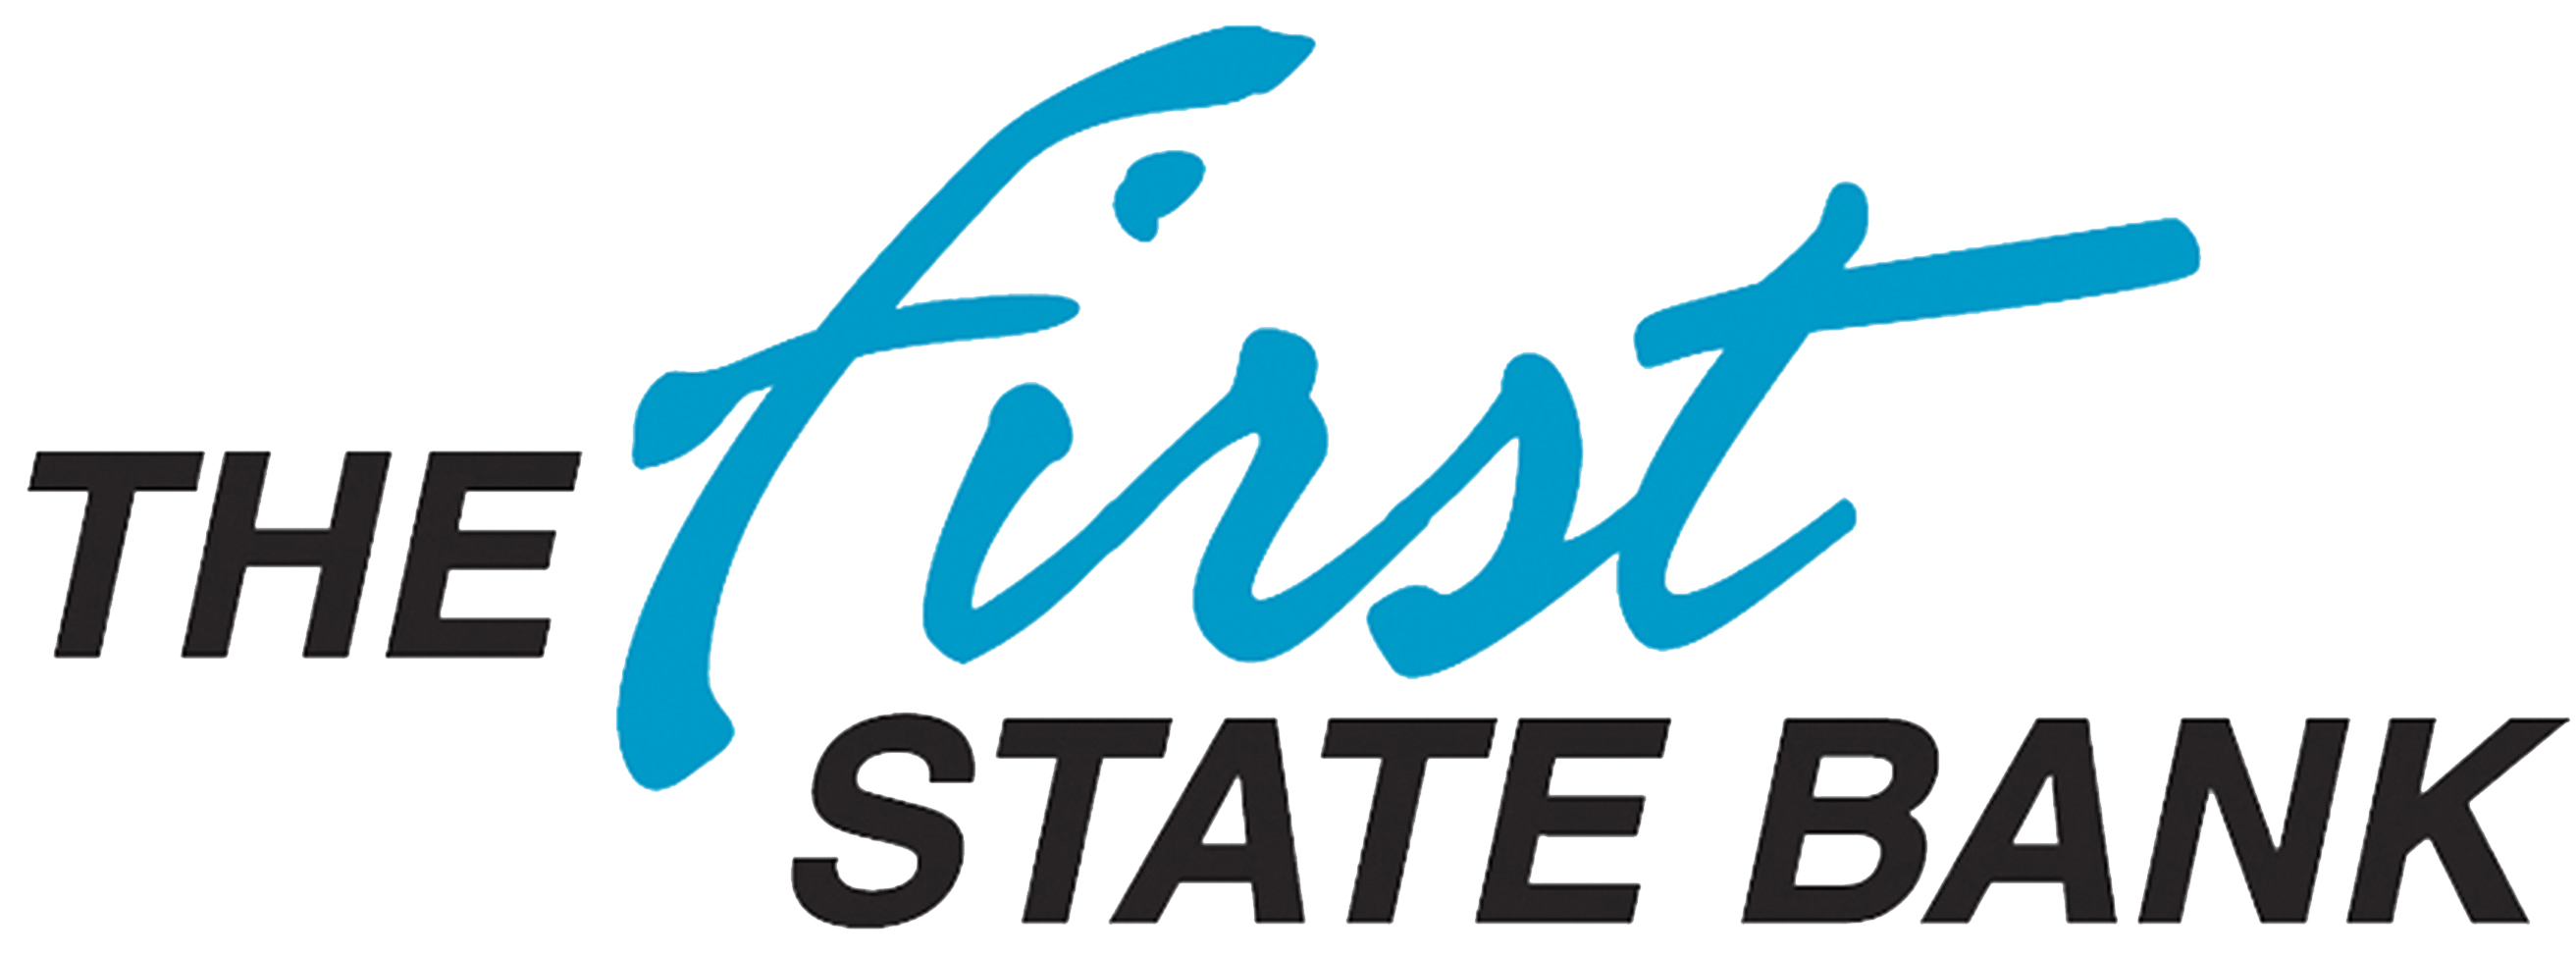 The First State Bank Company Logo